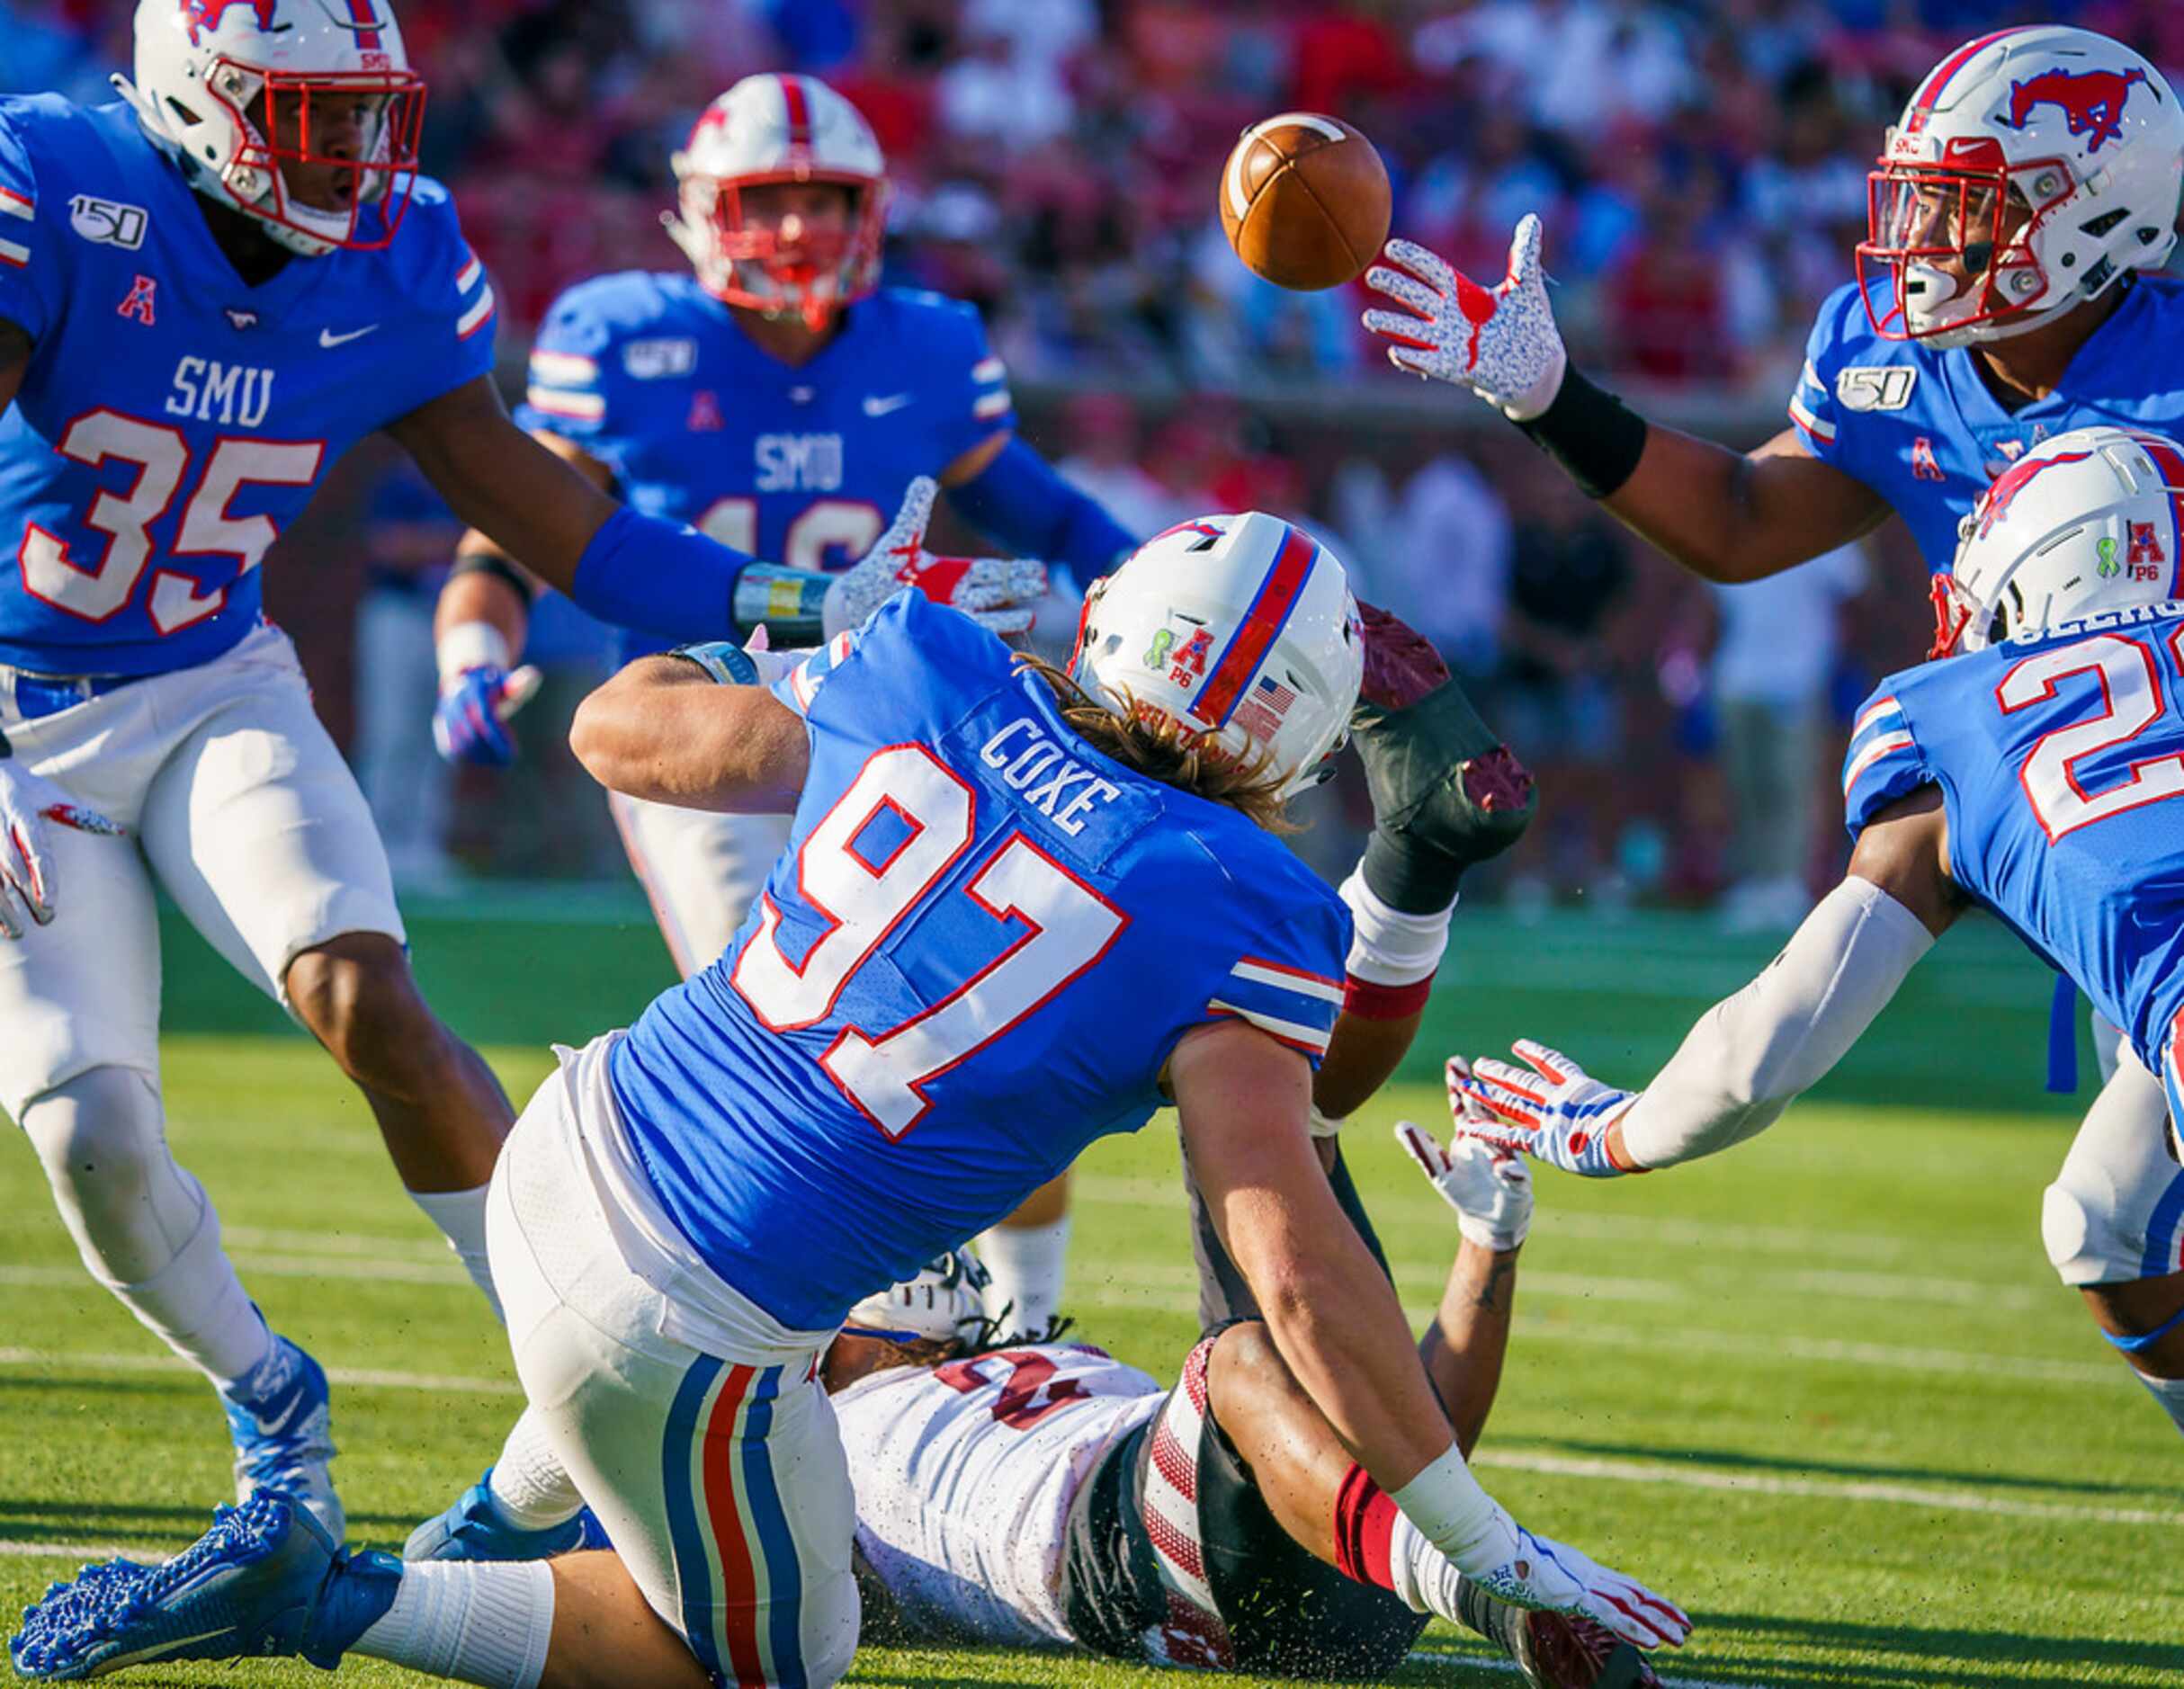 SMU safety Rodney Clemons (23) reaches to recover a fumble by Temple wide receiver Isaiah...